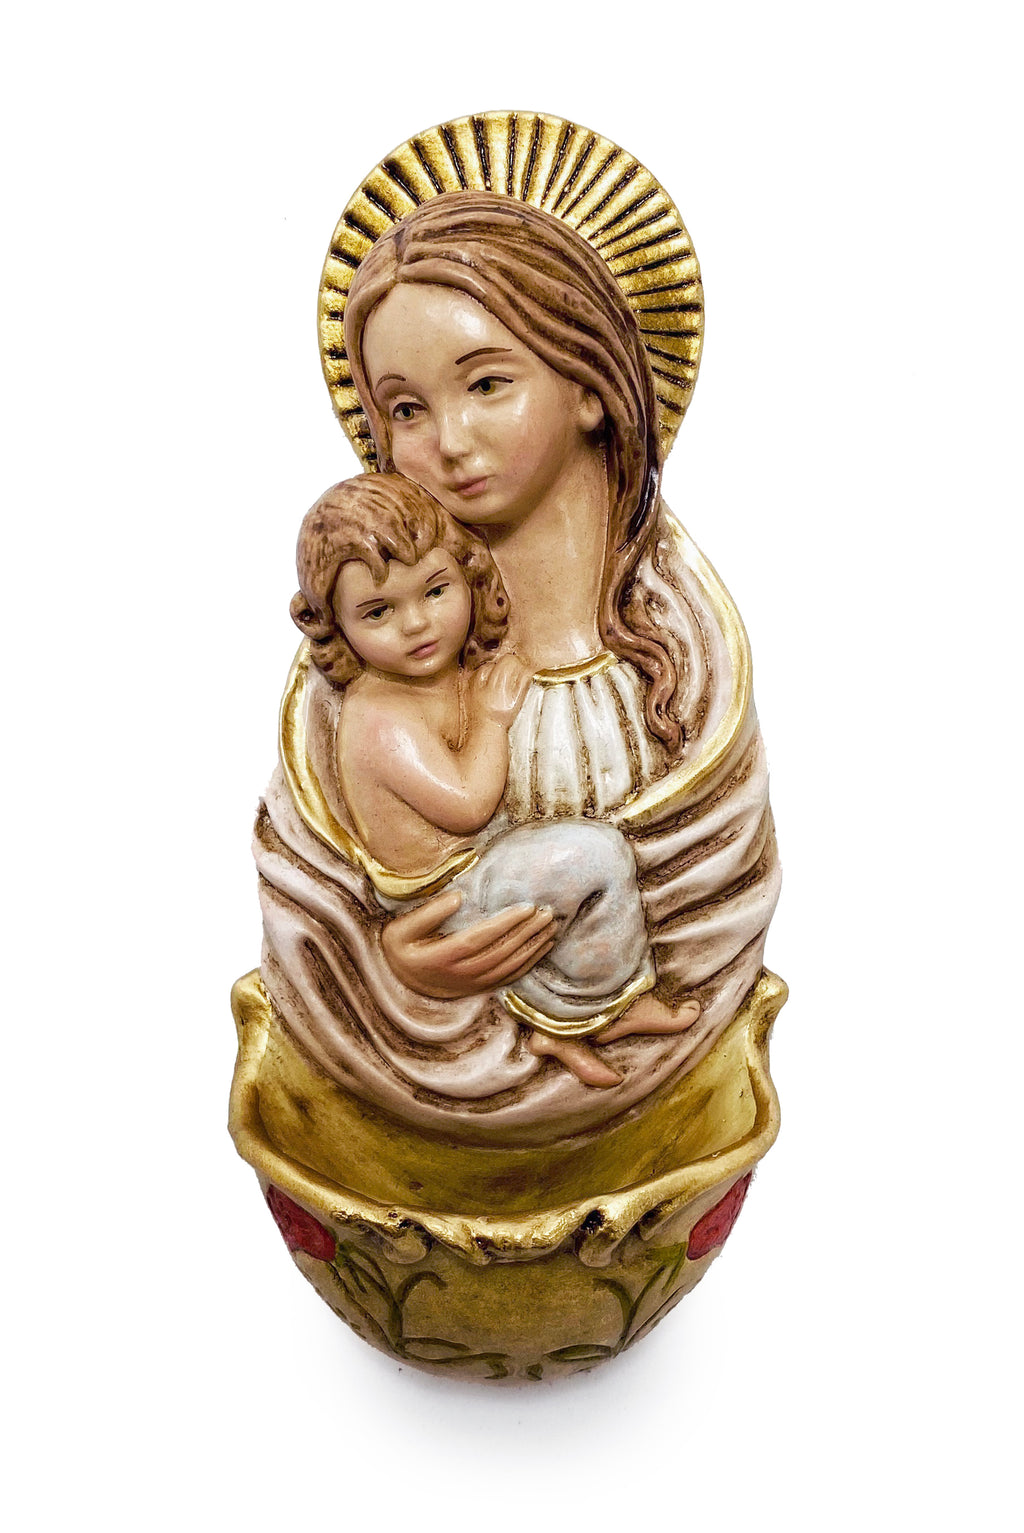 Madonna Spanish Font - 7 in. - Unique Catholic Gifts